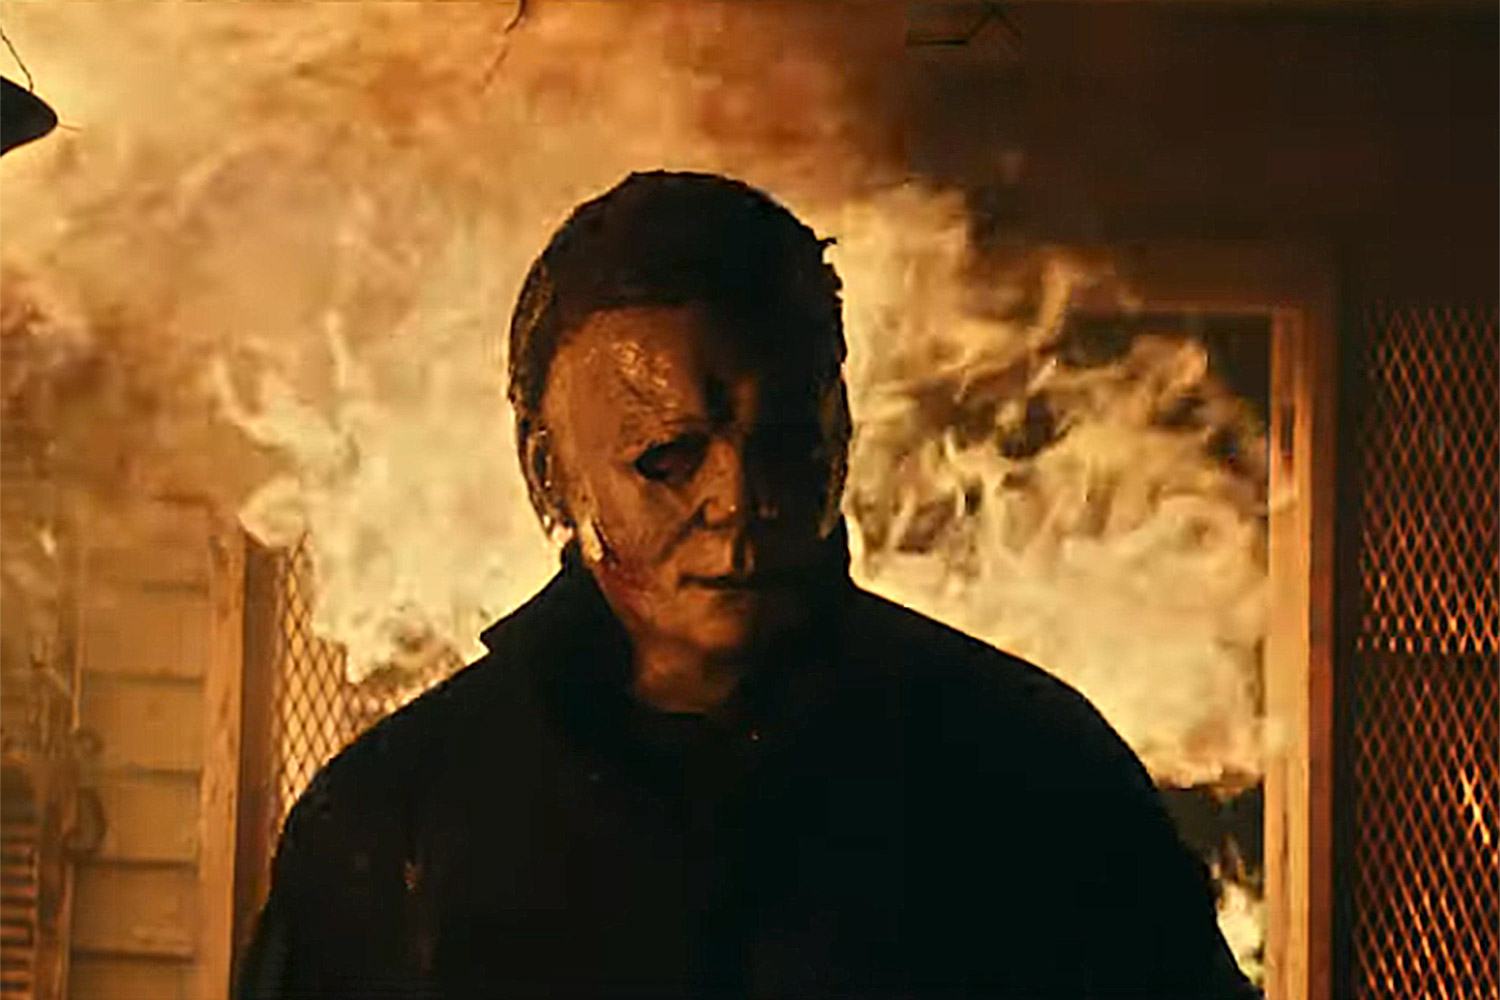 ‘Halloween Kills’ (2021): A Promising First Look At Myers’ Return?